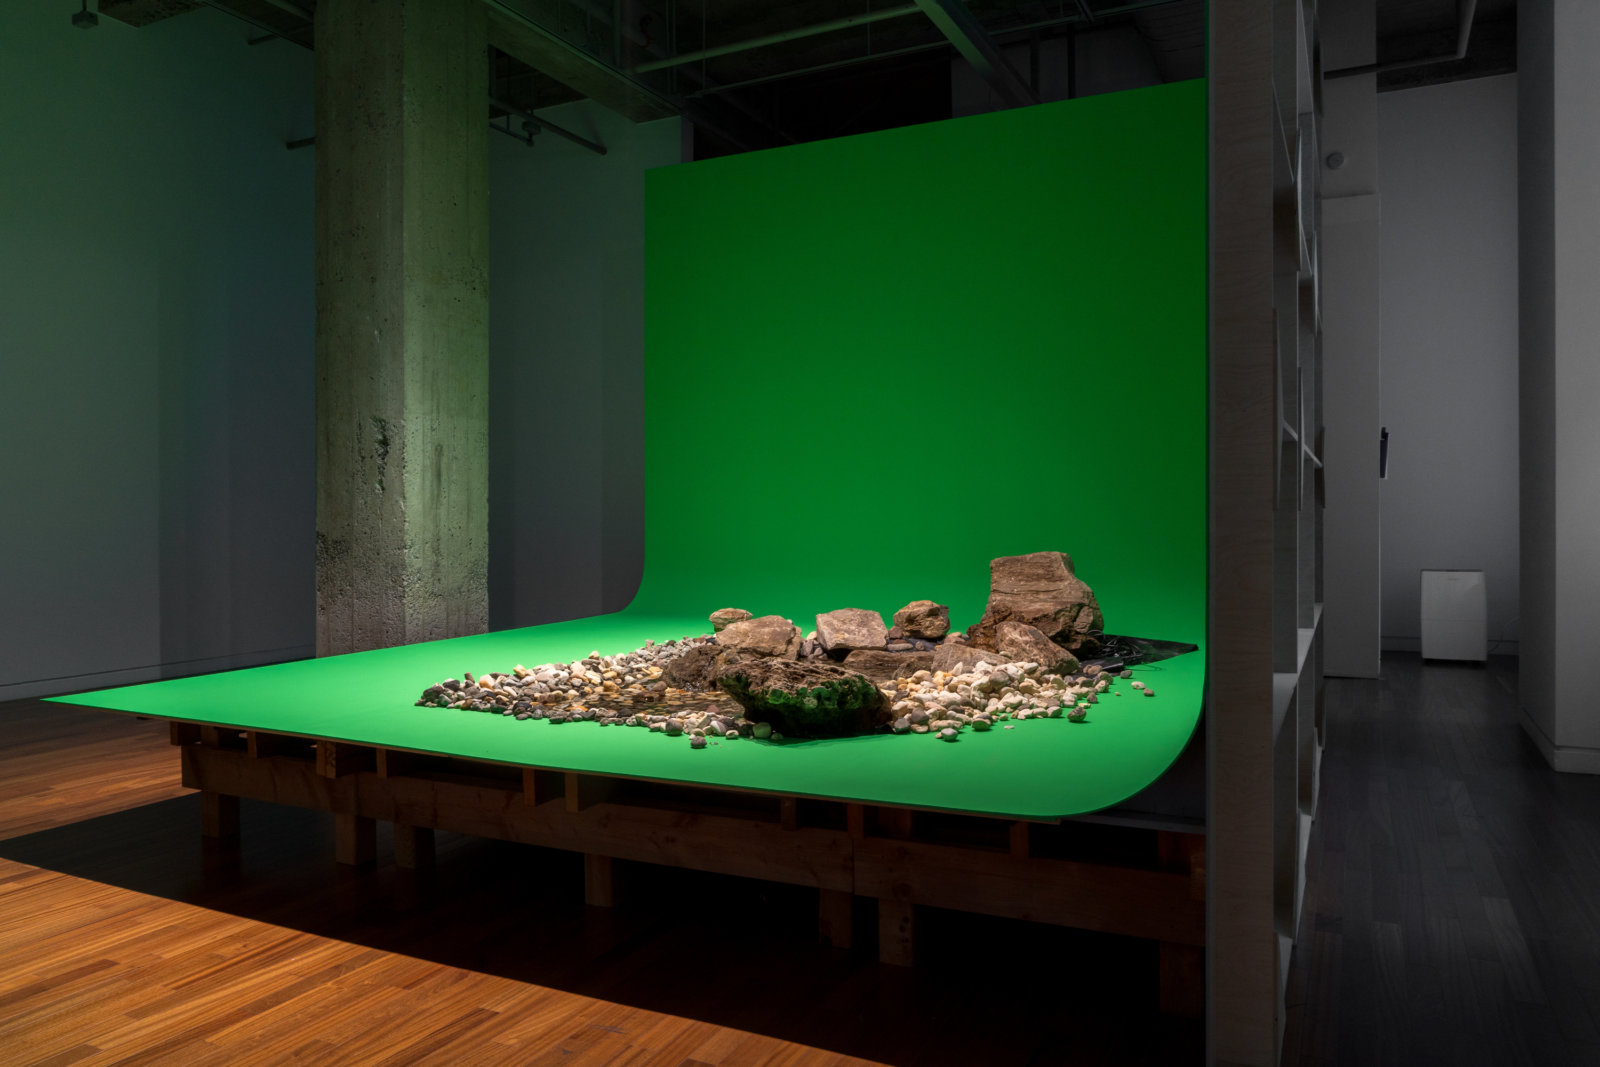 Abbas Akhavan, spill, 2021, boulders, rocks, river stones, water, PVC pond membrane, water pumps and tubing, pressure treated lumber, baltic birch plywood, various hardware, chroma key paint, full spectrum L.E.D. lightbulbs, 144 x 144 x 144 in. (366 x 366 x 366 cm). Installation view, Sensing Nature, Momenta Biennale at Phi Foundation for Contemporary Art, Montreal, Canada